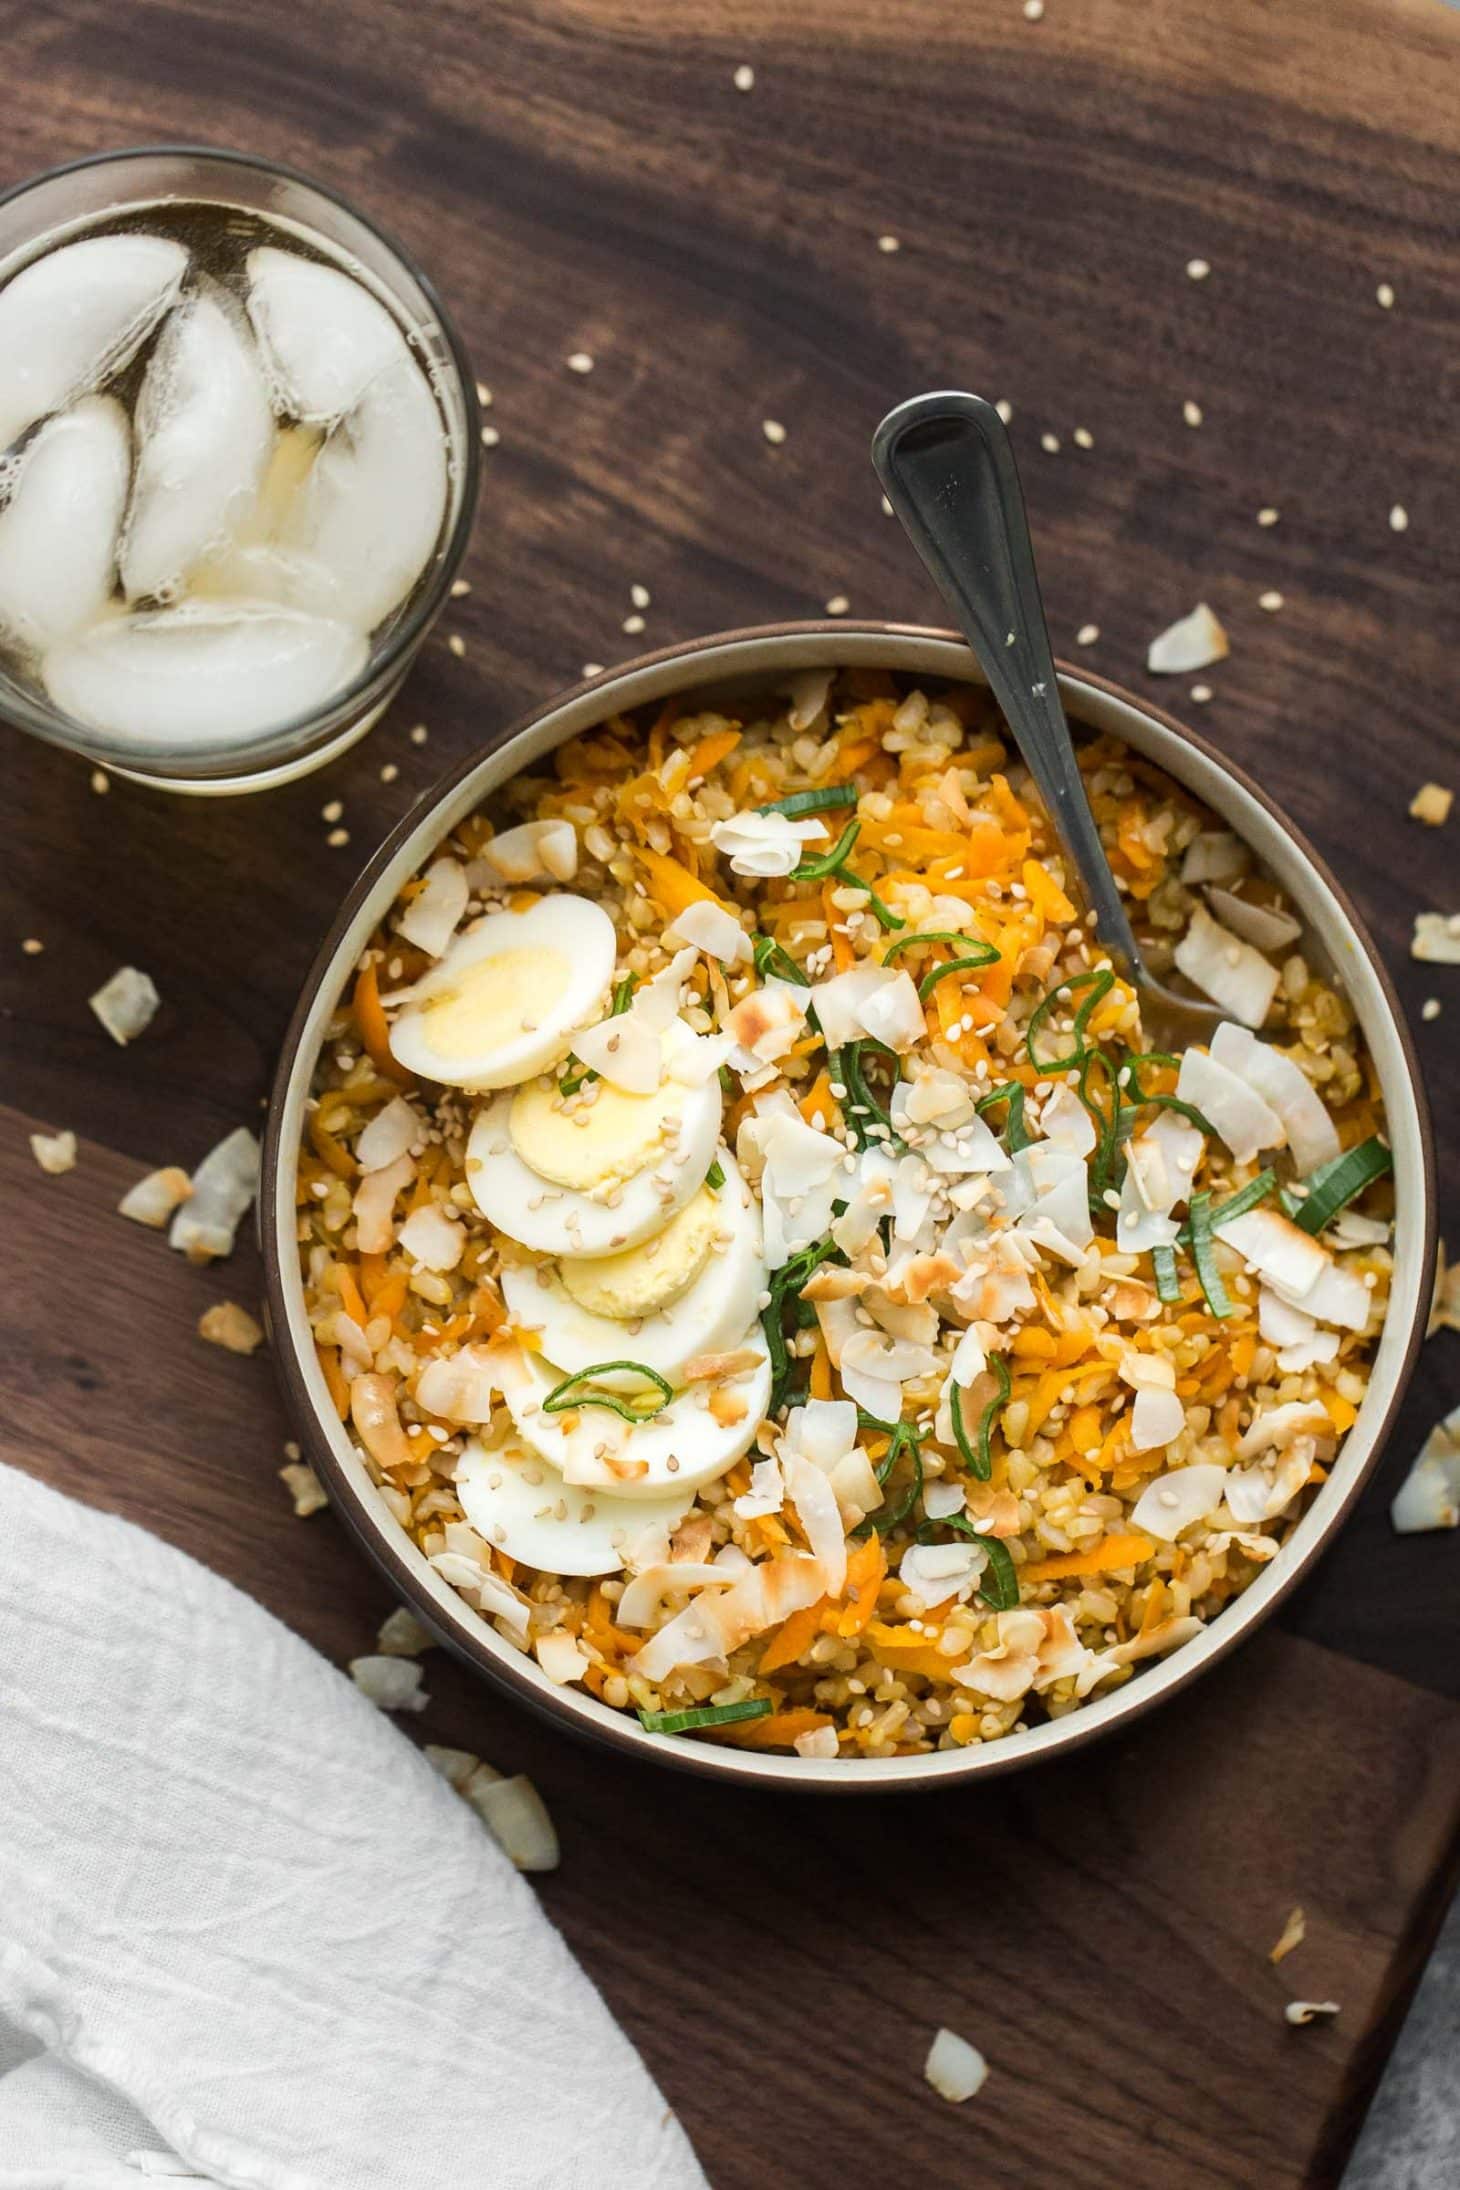 Ginger Brown Rice with Shredded Carrots